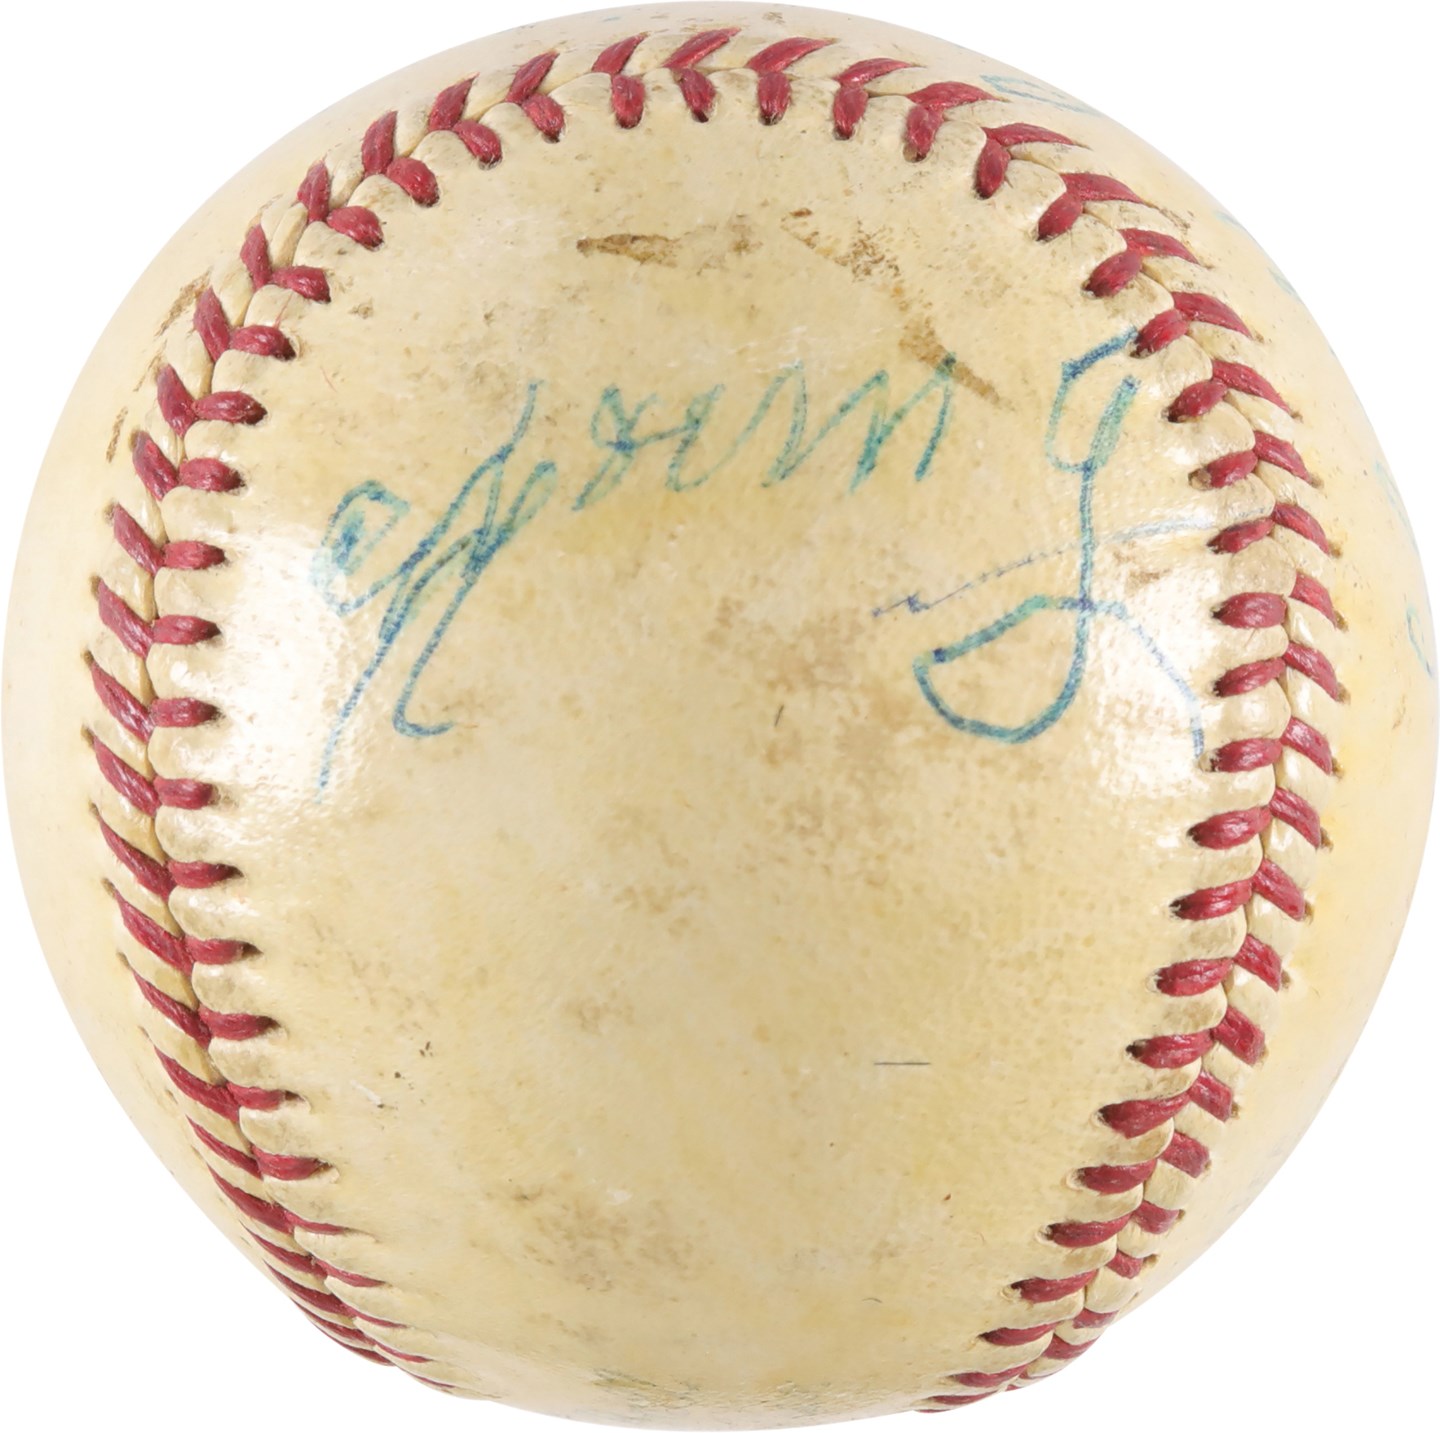 - Cy Young and Clark Griffith Dual-Signed Baseball (PSA)